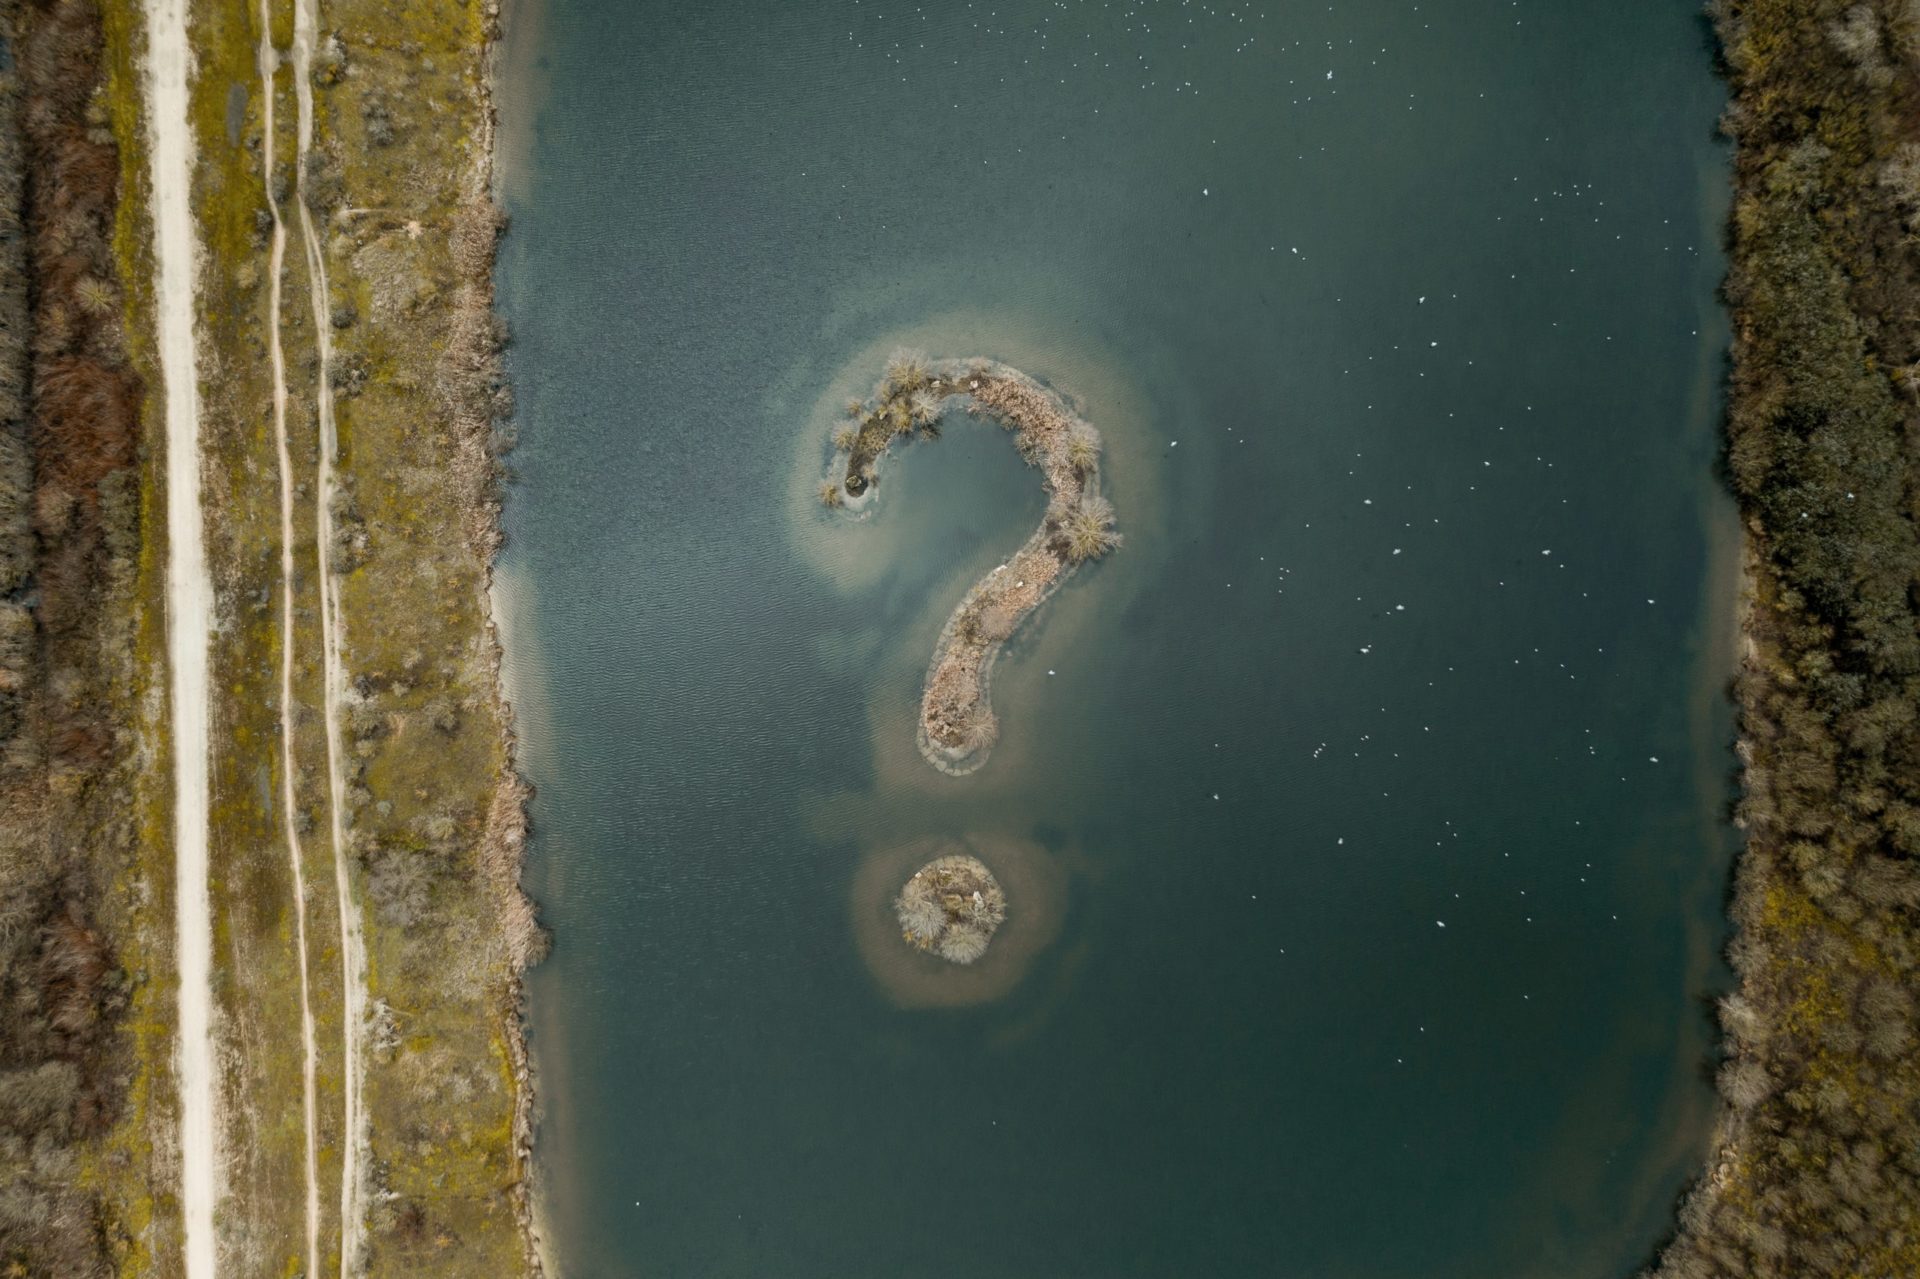 Aerial view of green and brown island shaped like a question mark. (Photo by Jules Bss on Unsplash)